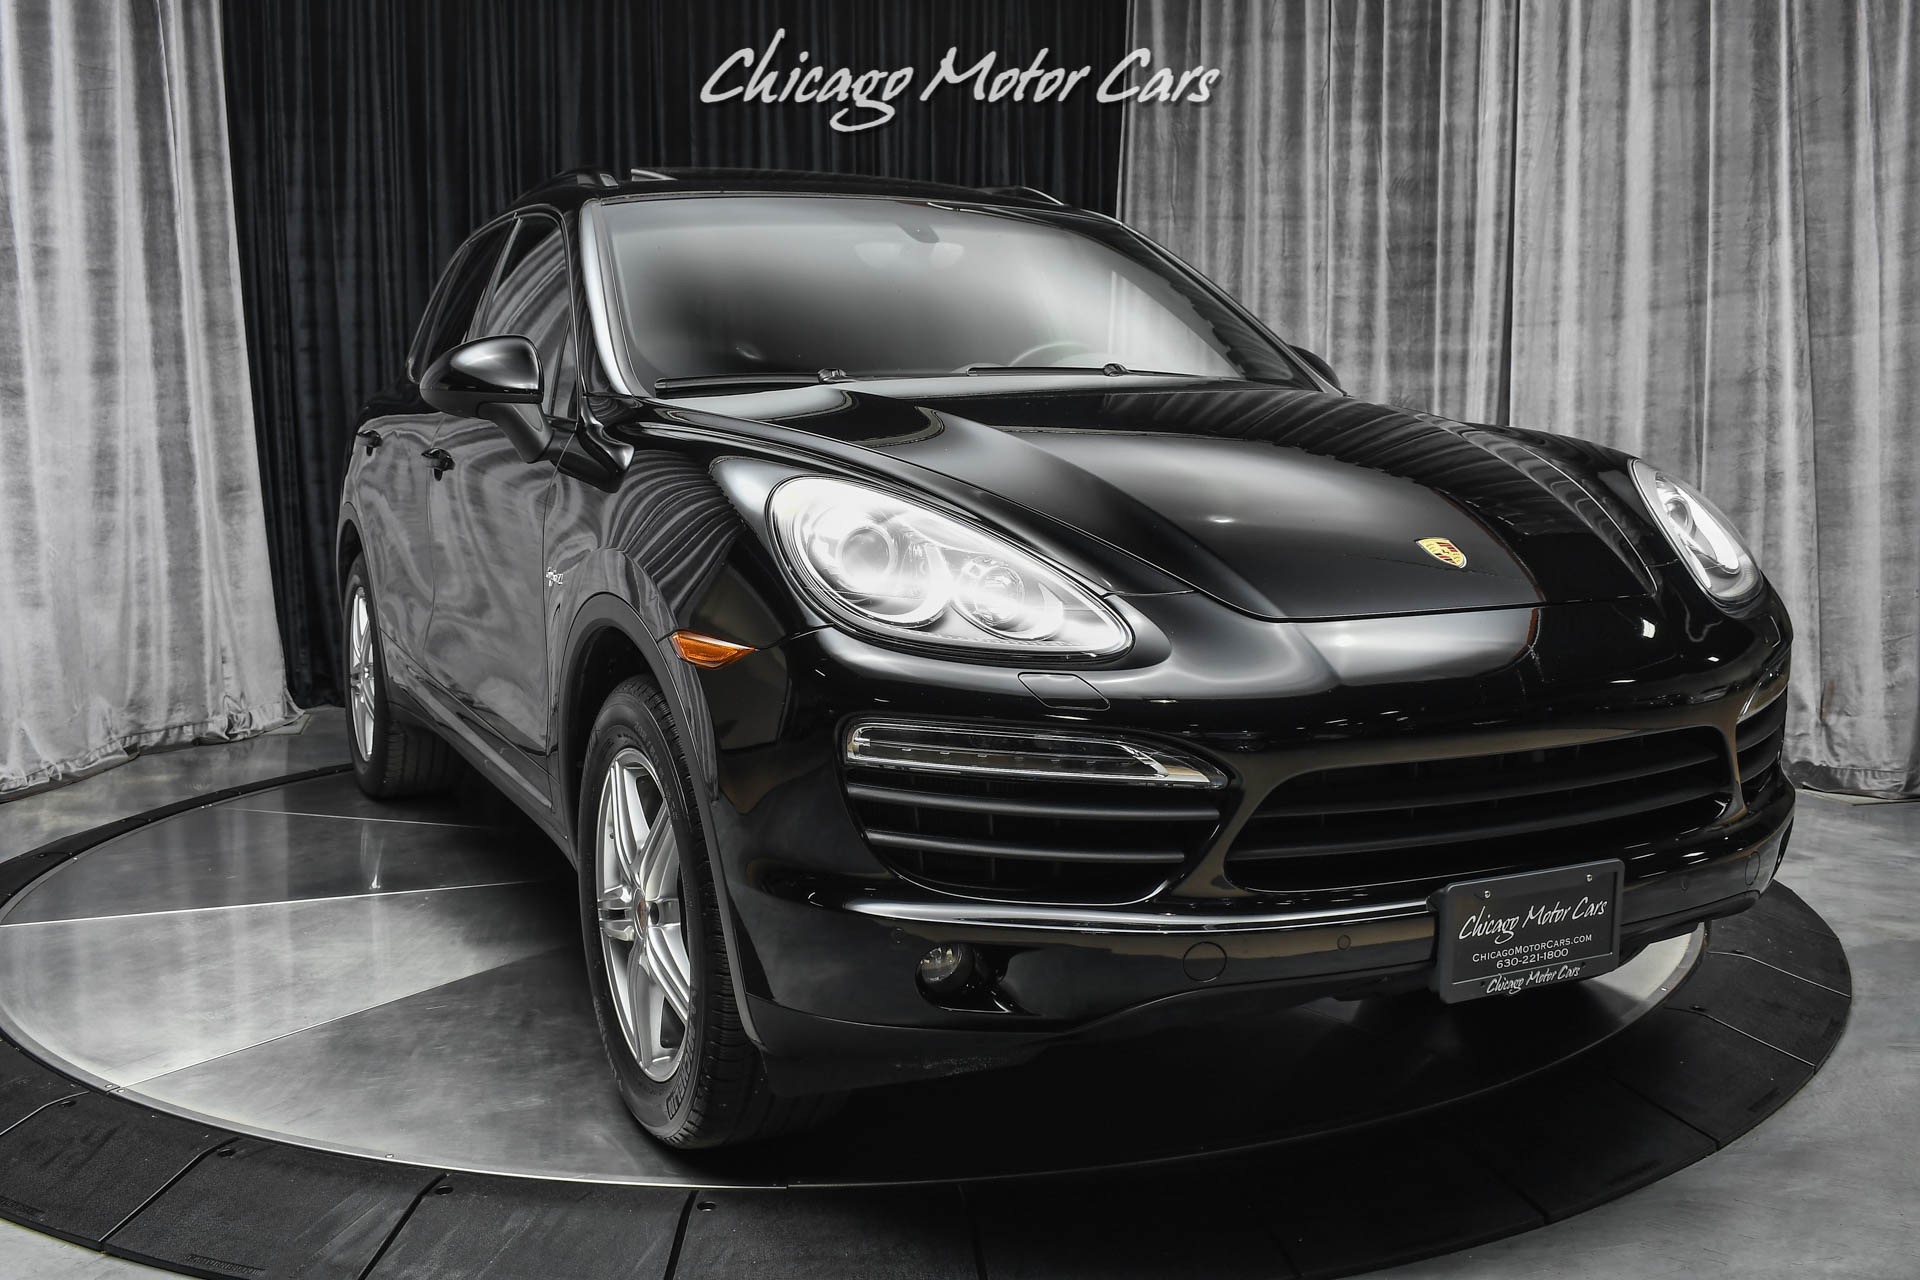 Used 2014 Porsche Cayenne AWD S Hybrid Convenience Package! Navigation!  PDLS! For Sale (Special Pricing) | Chicago Motor Cars Stock #18078A